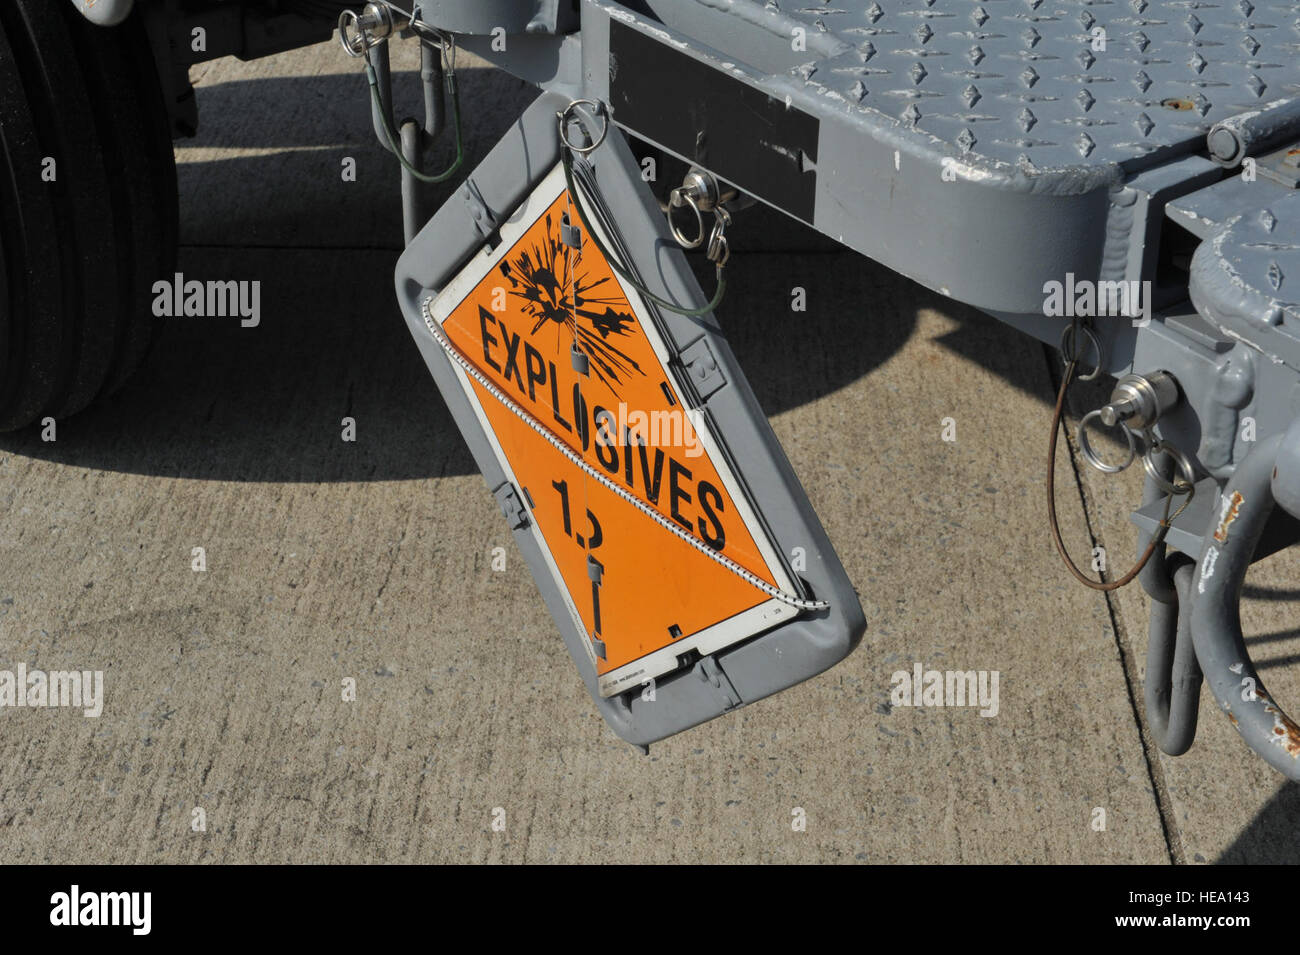 A munitions trailer displays an explosives sign on Hurlburt Field, Fla., Dec. 6, 2013. The sign is displayed to warn personnel of its explosive contents. Staff Sgt. John Bainter) Stock Photo